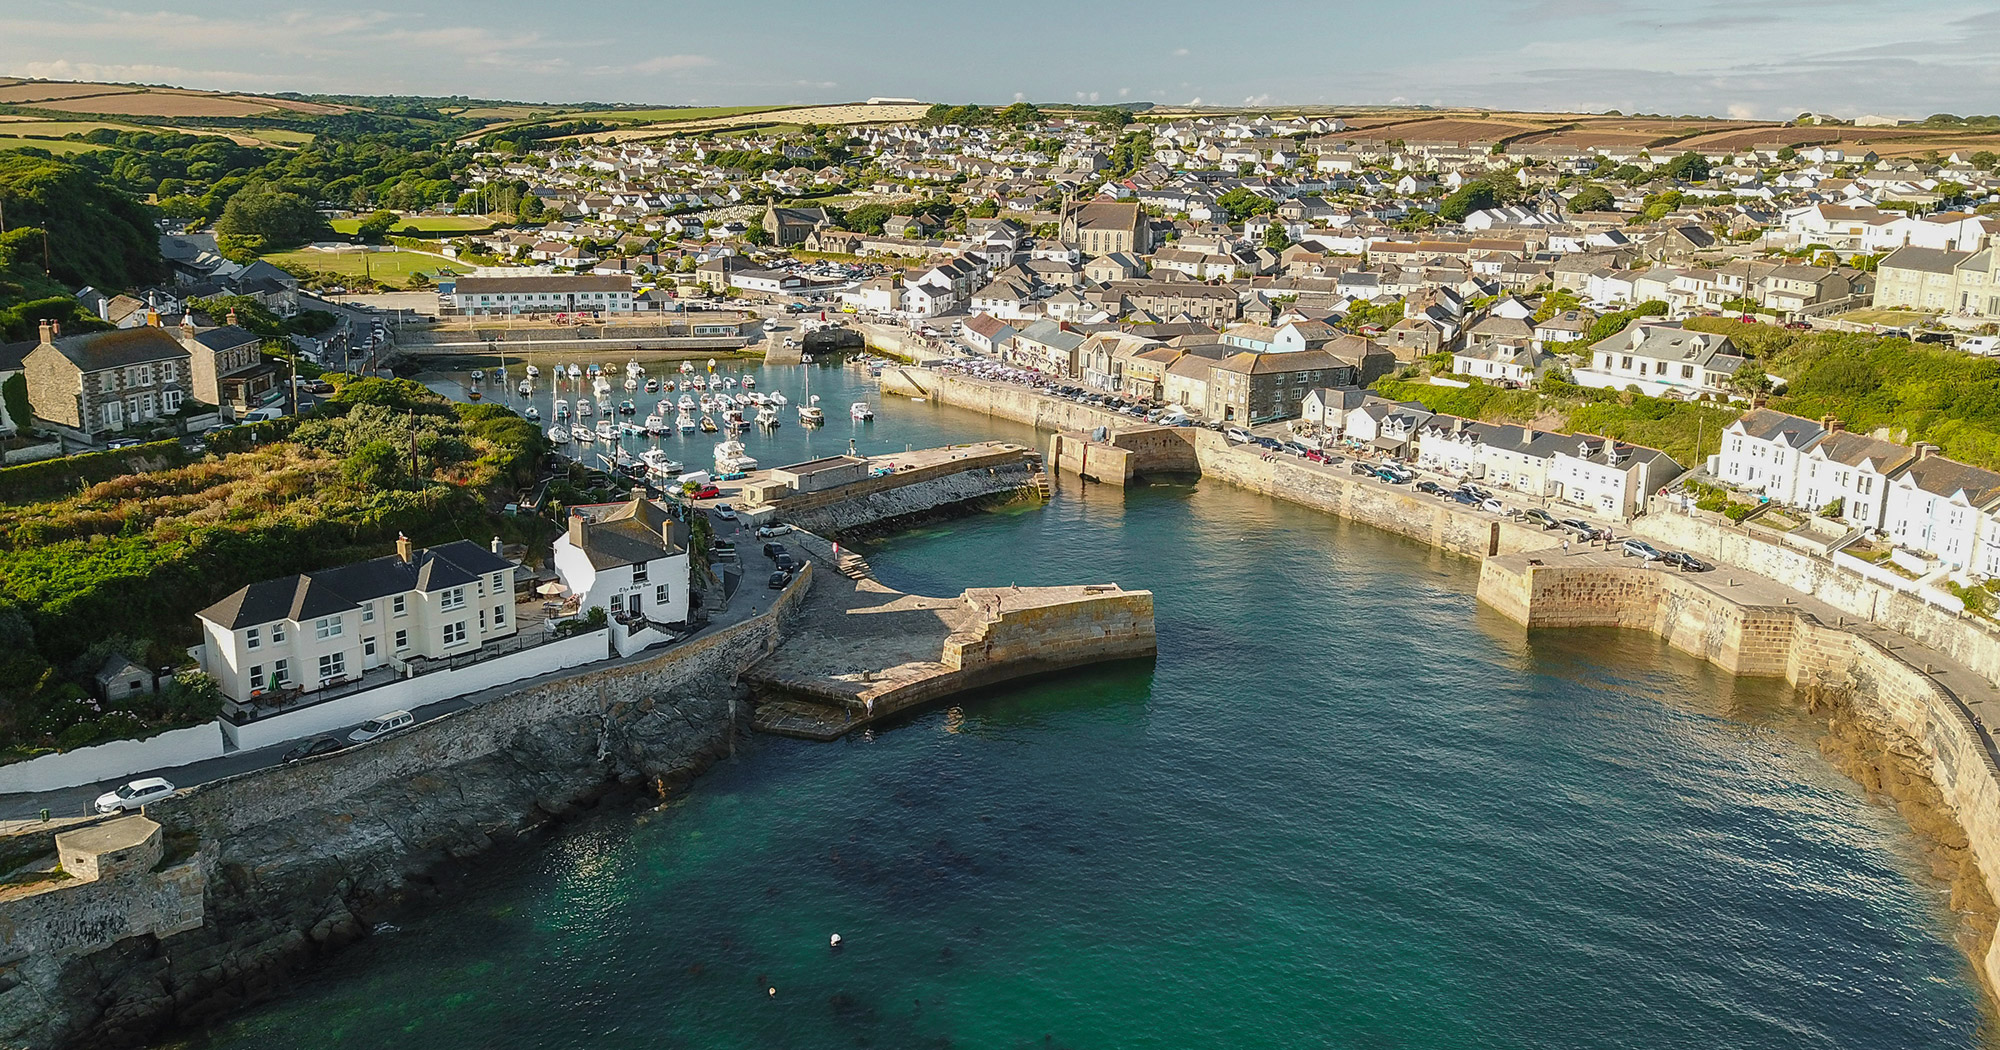 An aerial view of Porthleven